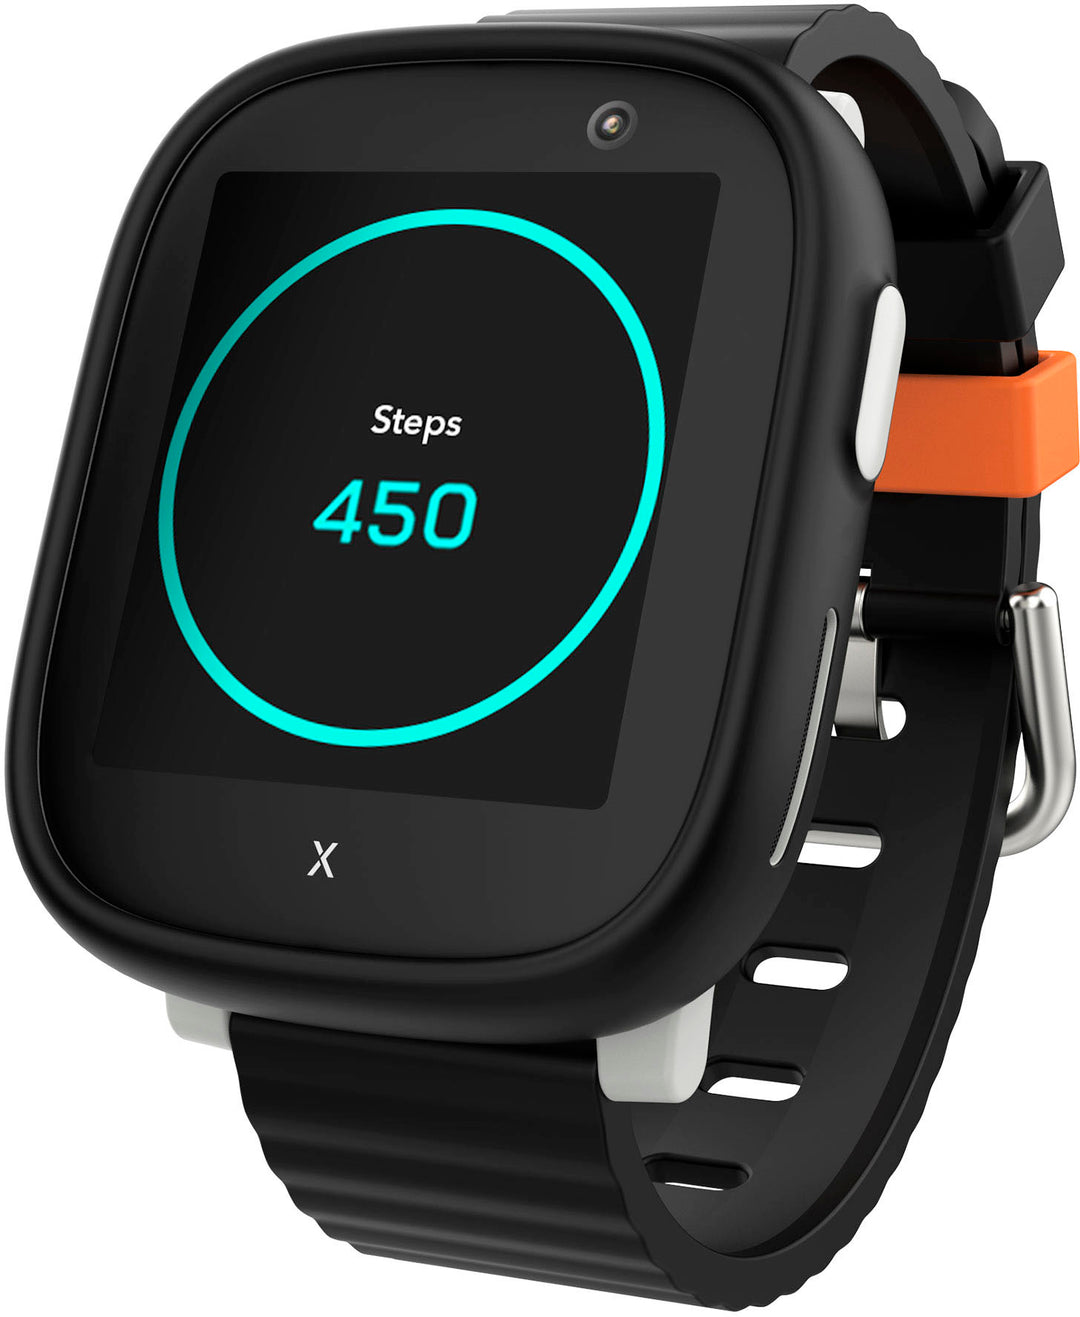 Xplora X6Play Smart Watch Cell Phone with GPS and pre-installed SIM Card - Black_2